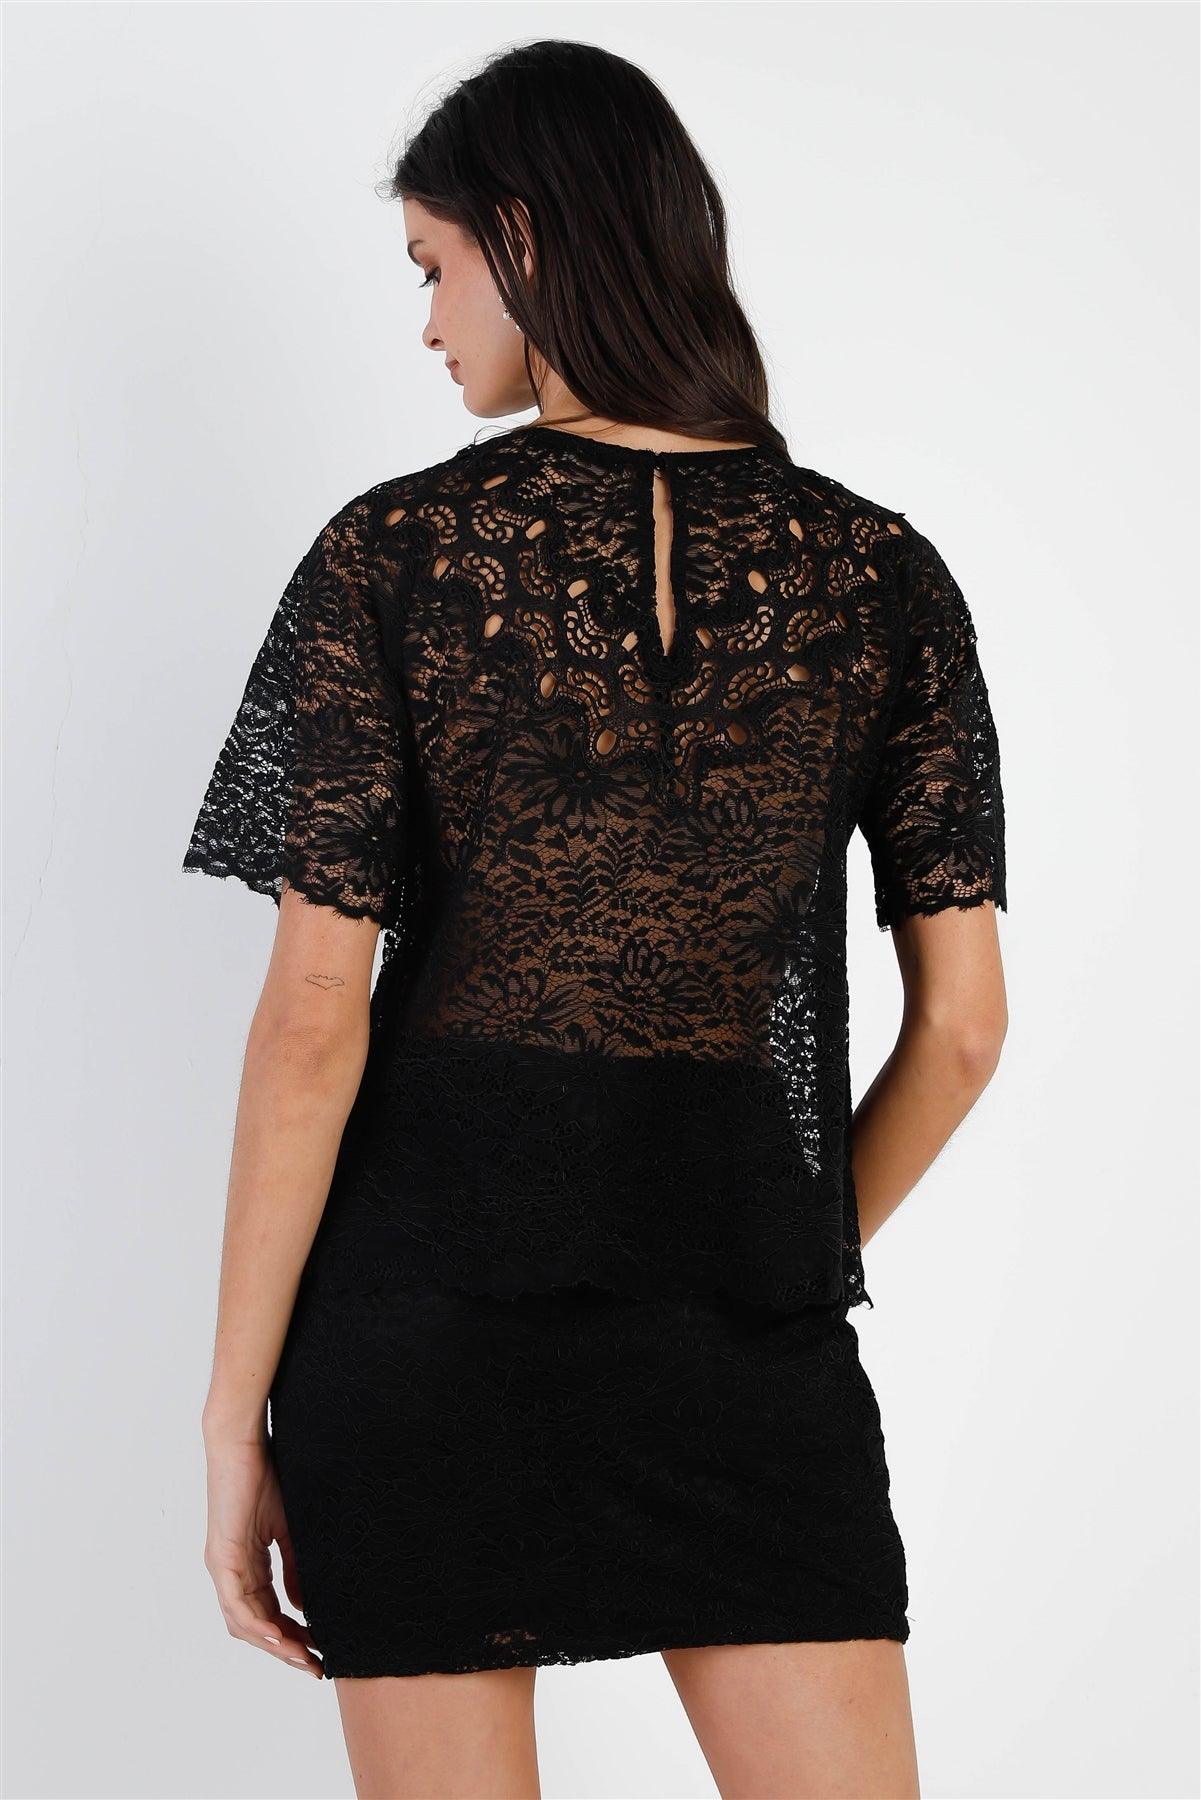 Black Lace Embroidery Detail Short Sleeve Semi-Sheer Top & Skirt Set /1-2-1